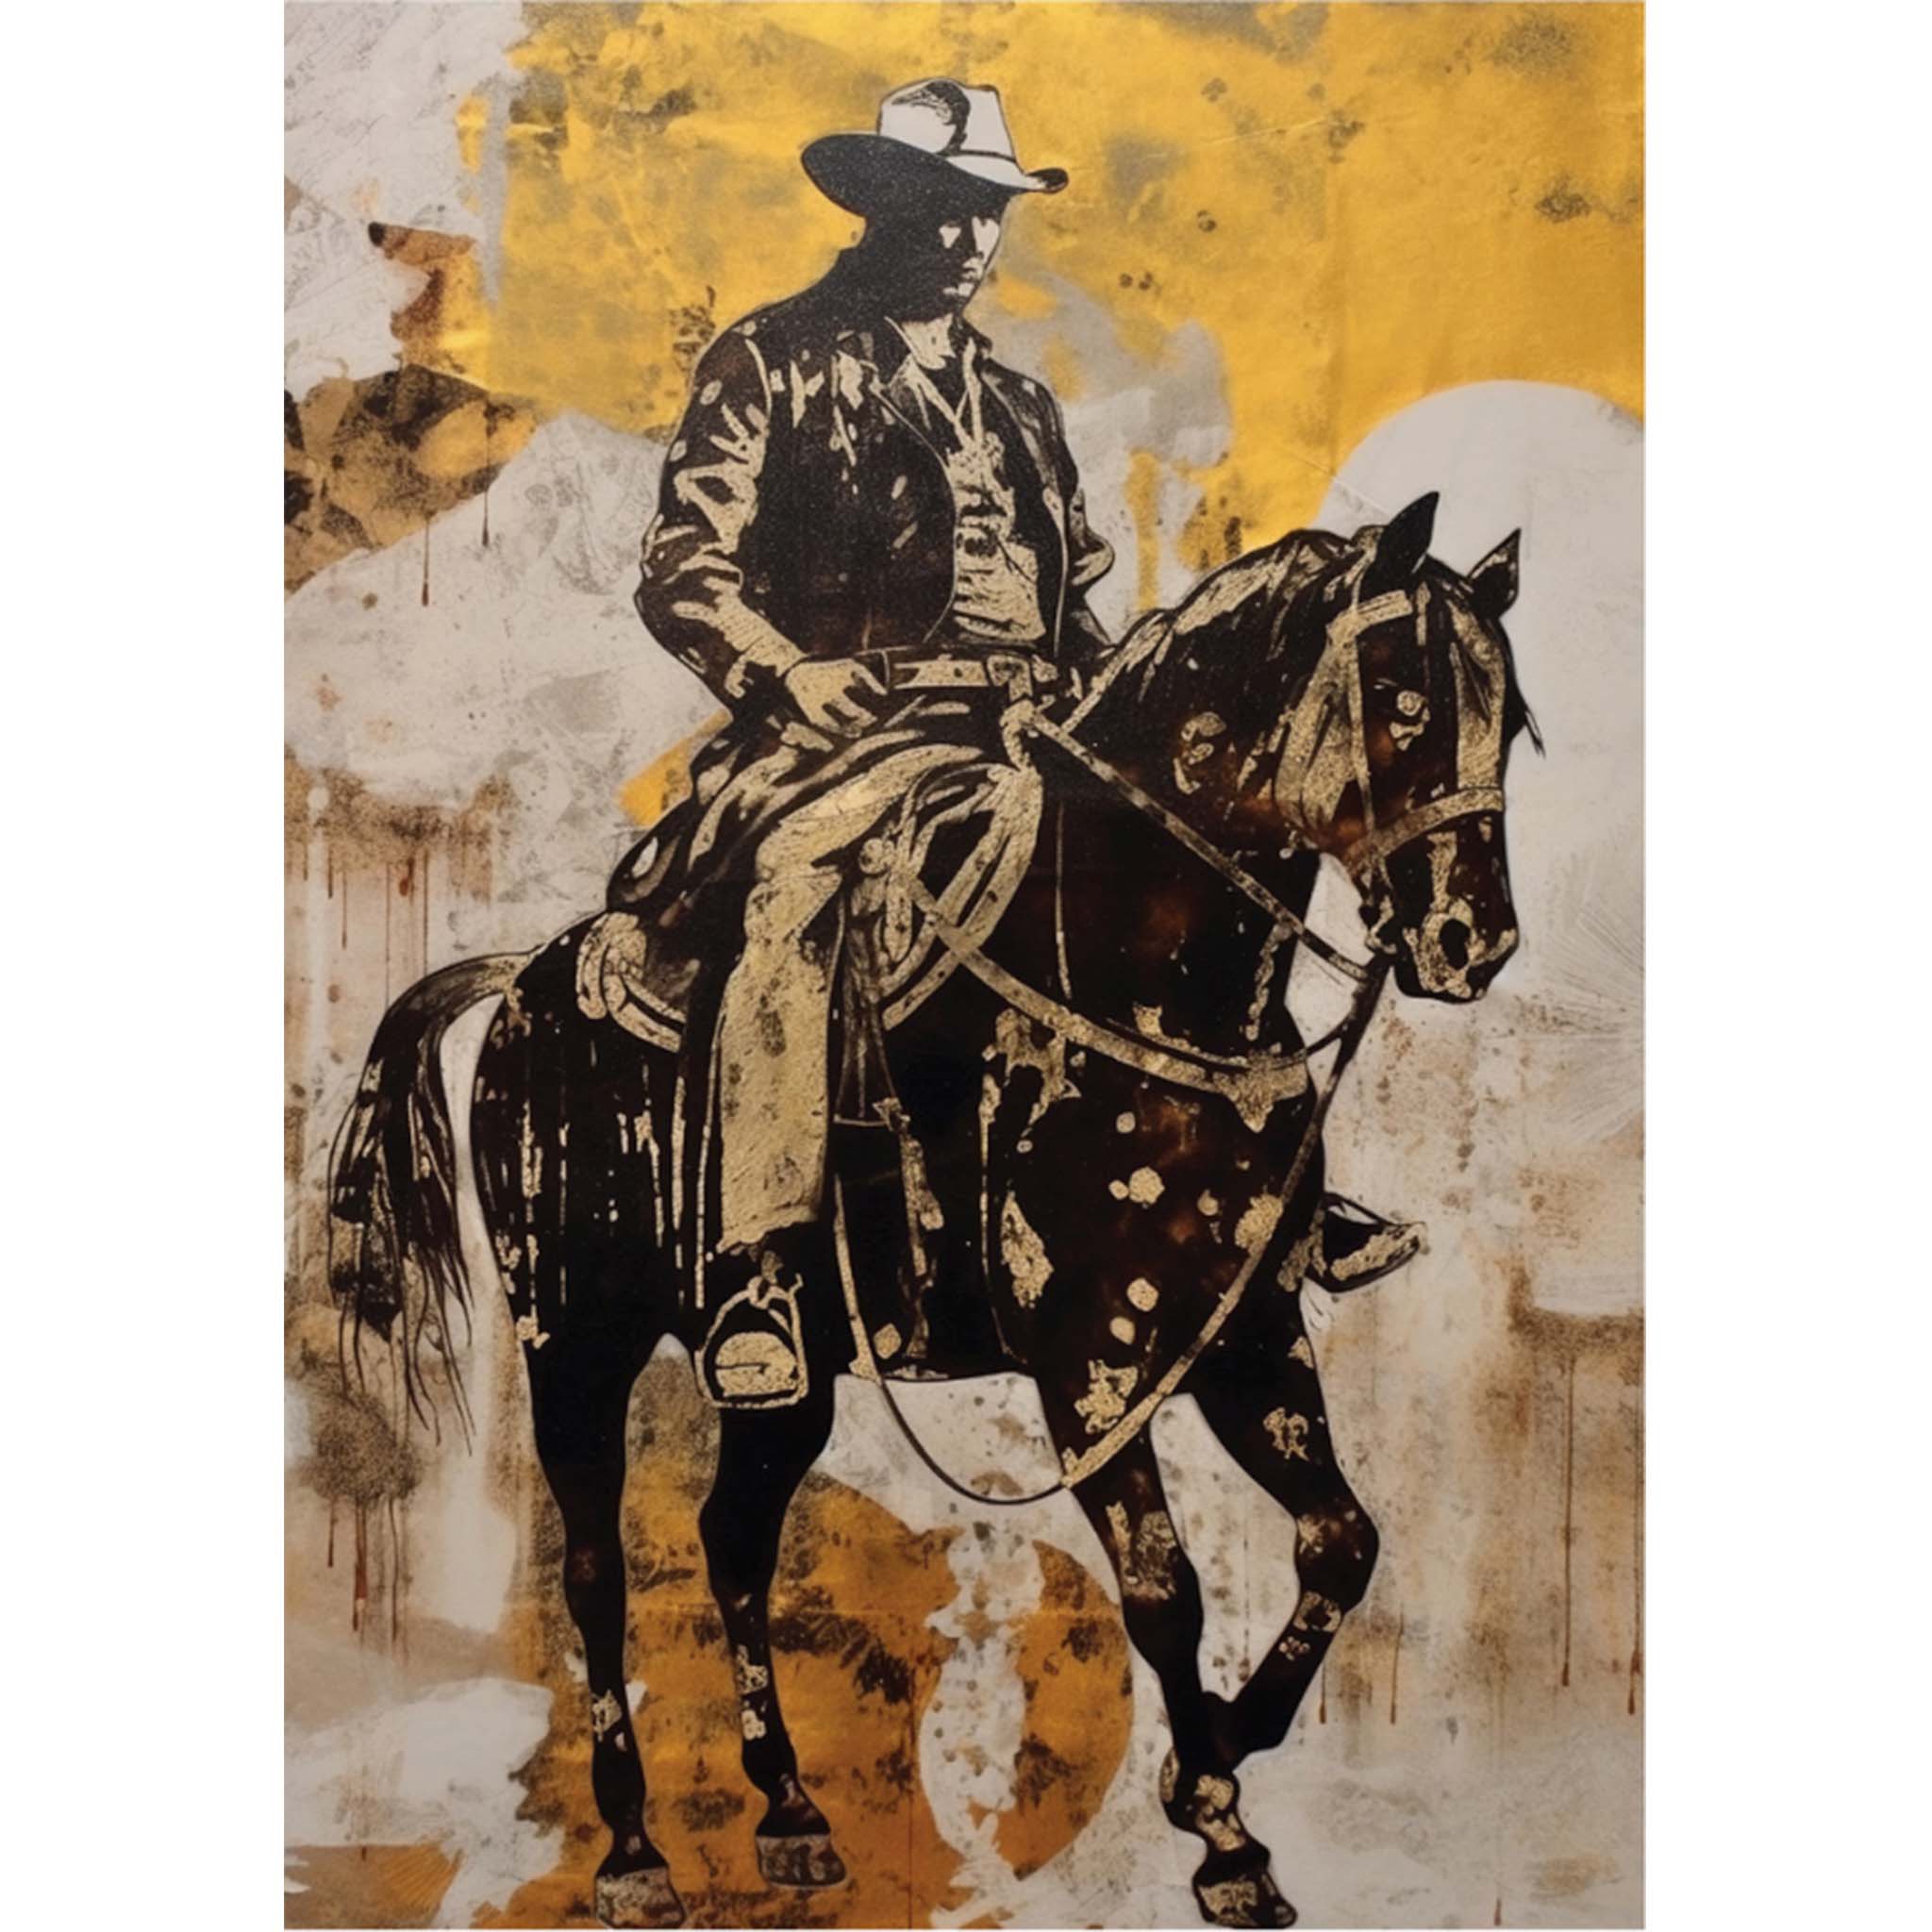 A1 fiber paper design featuring a distressed yellow and sepia background and a cowboy astride a horse. White borders are on the sides.